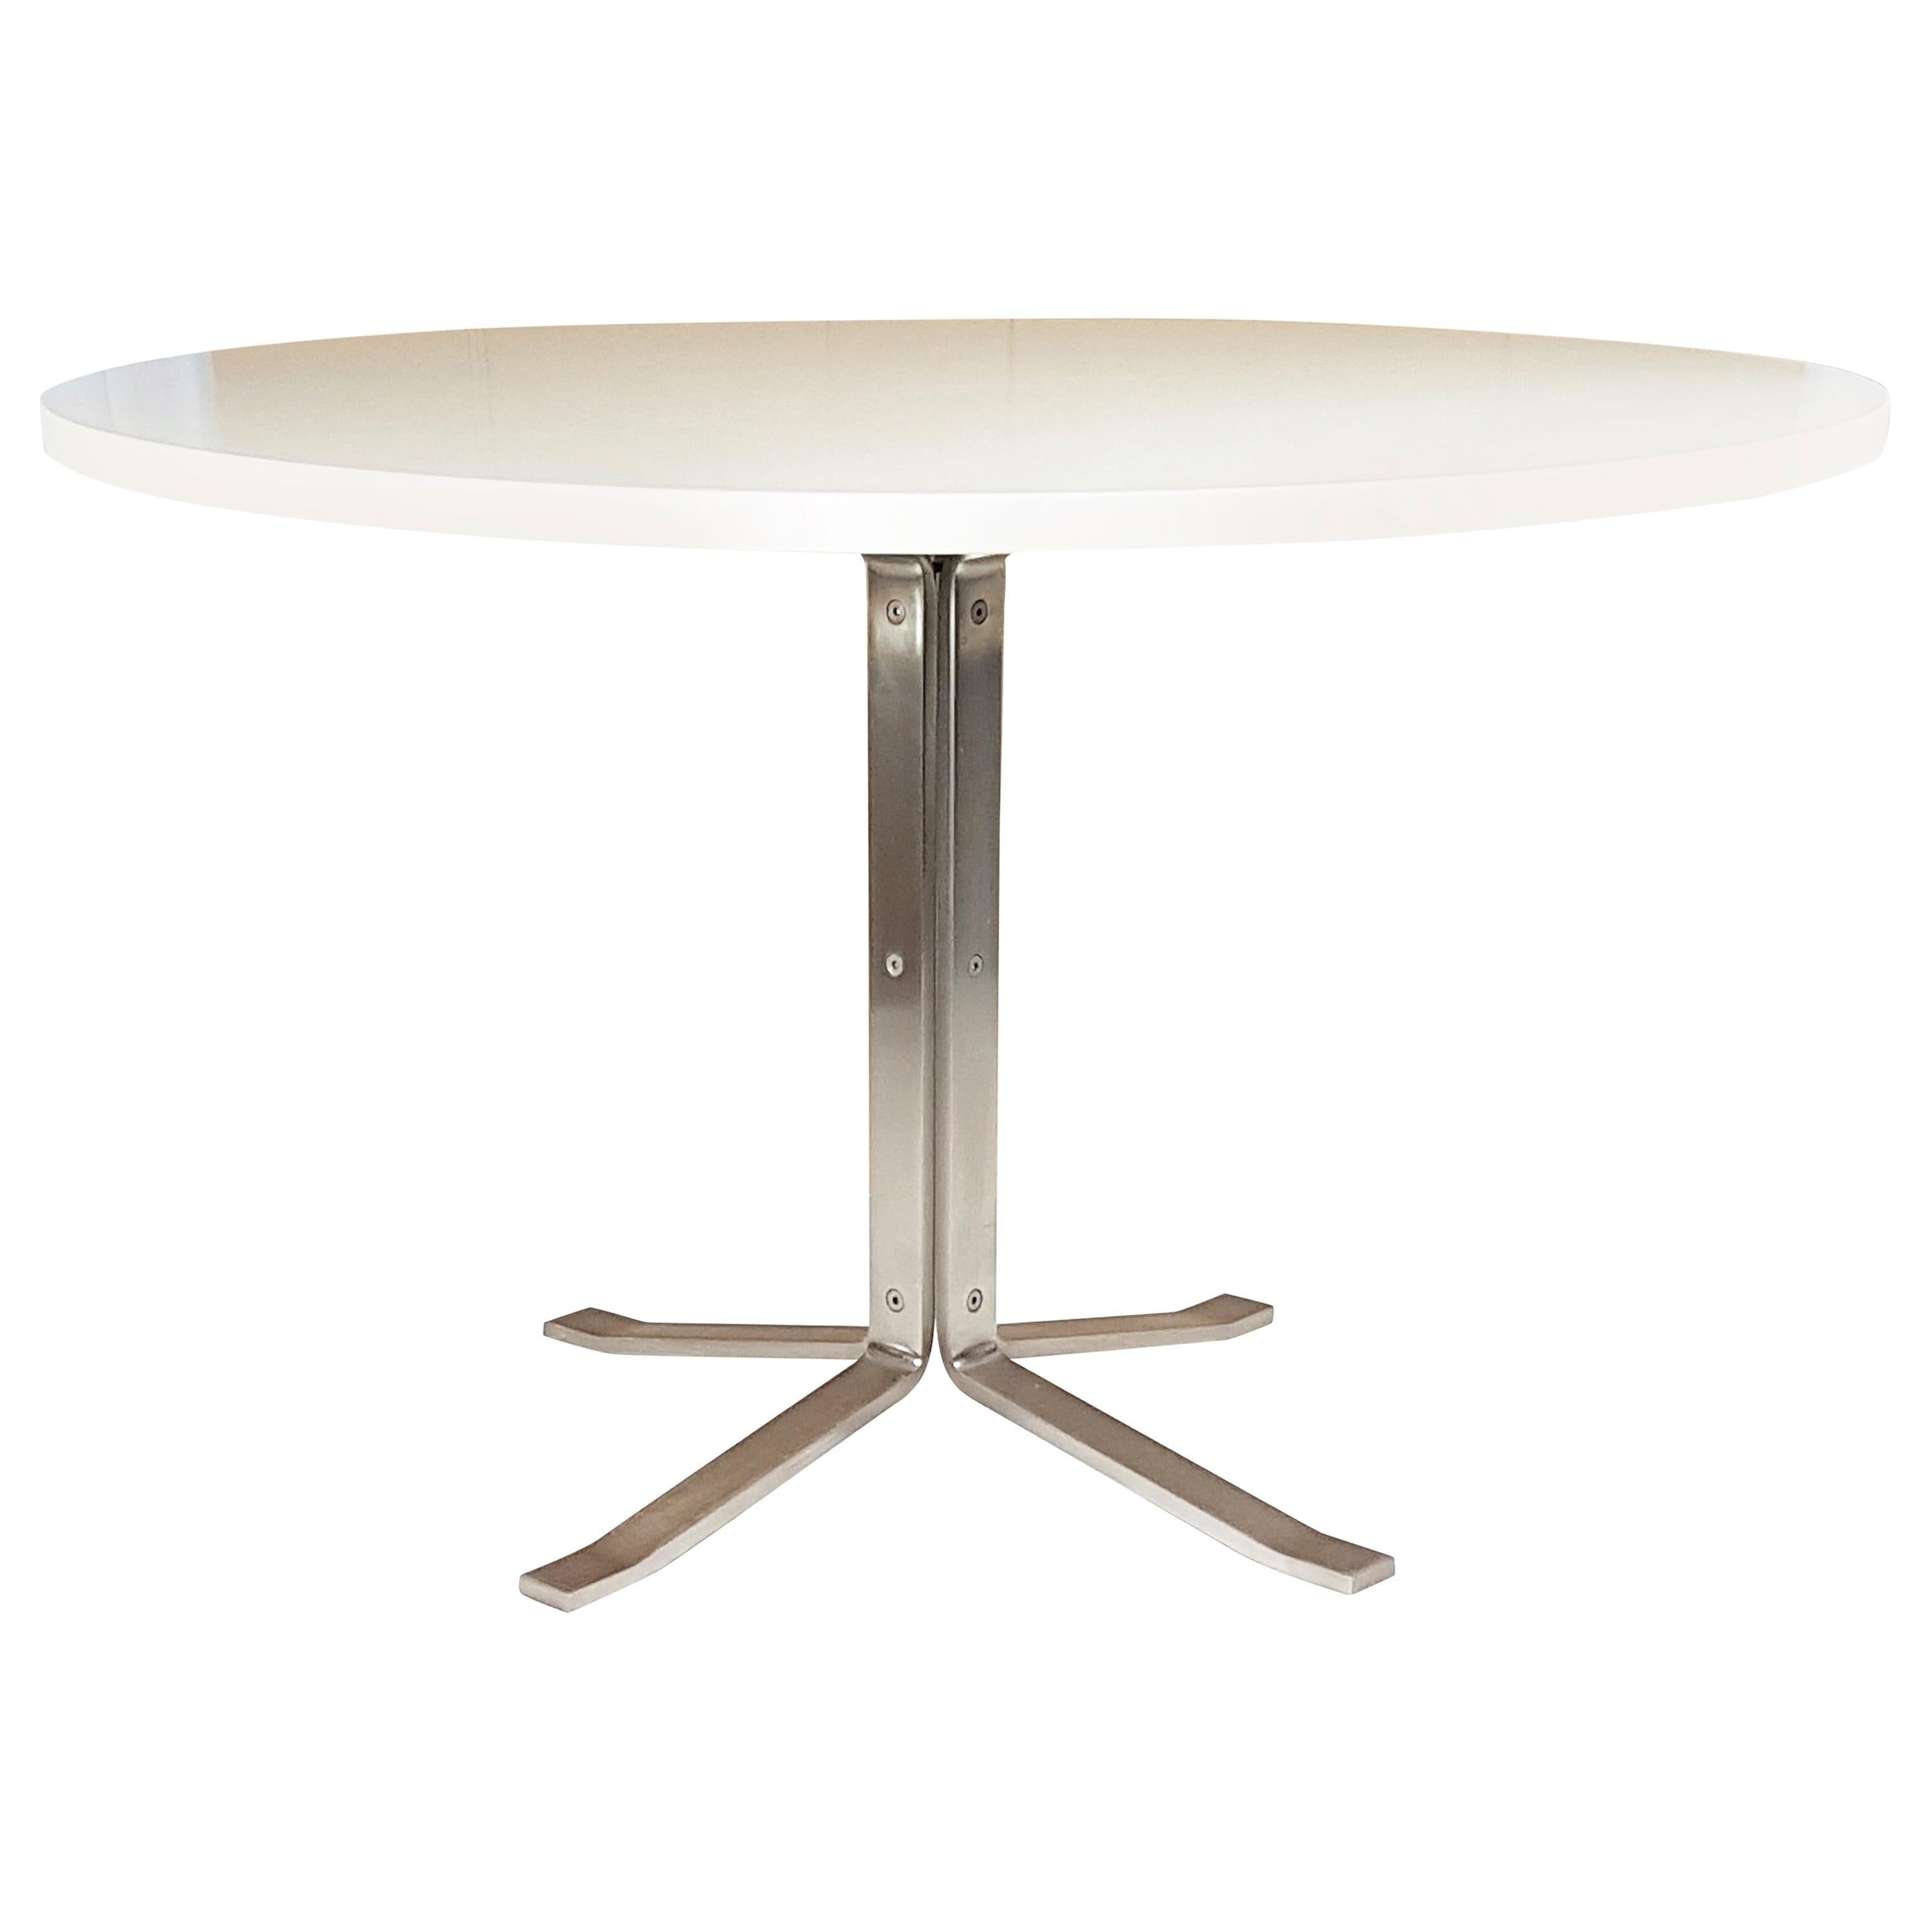 Italian Steel and White Wooden 1970s Round Table by G. Moscatelli for Formanova